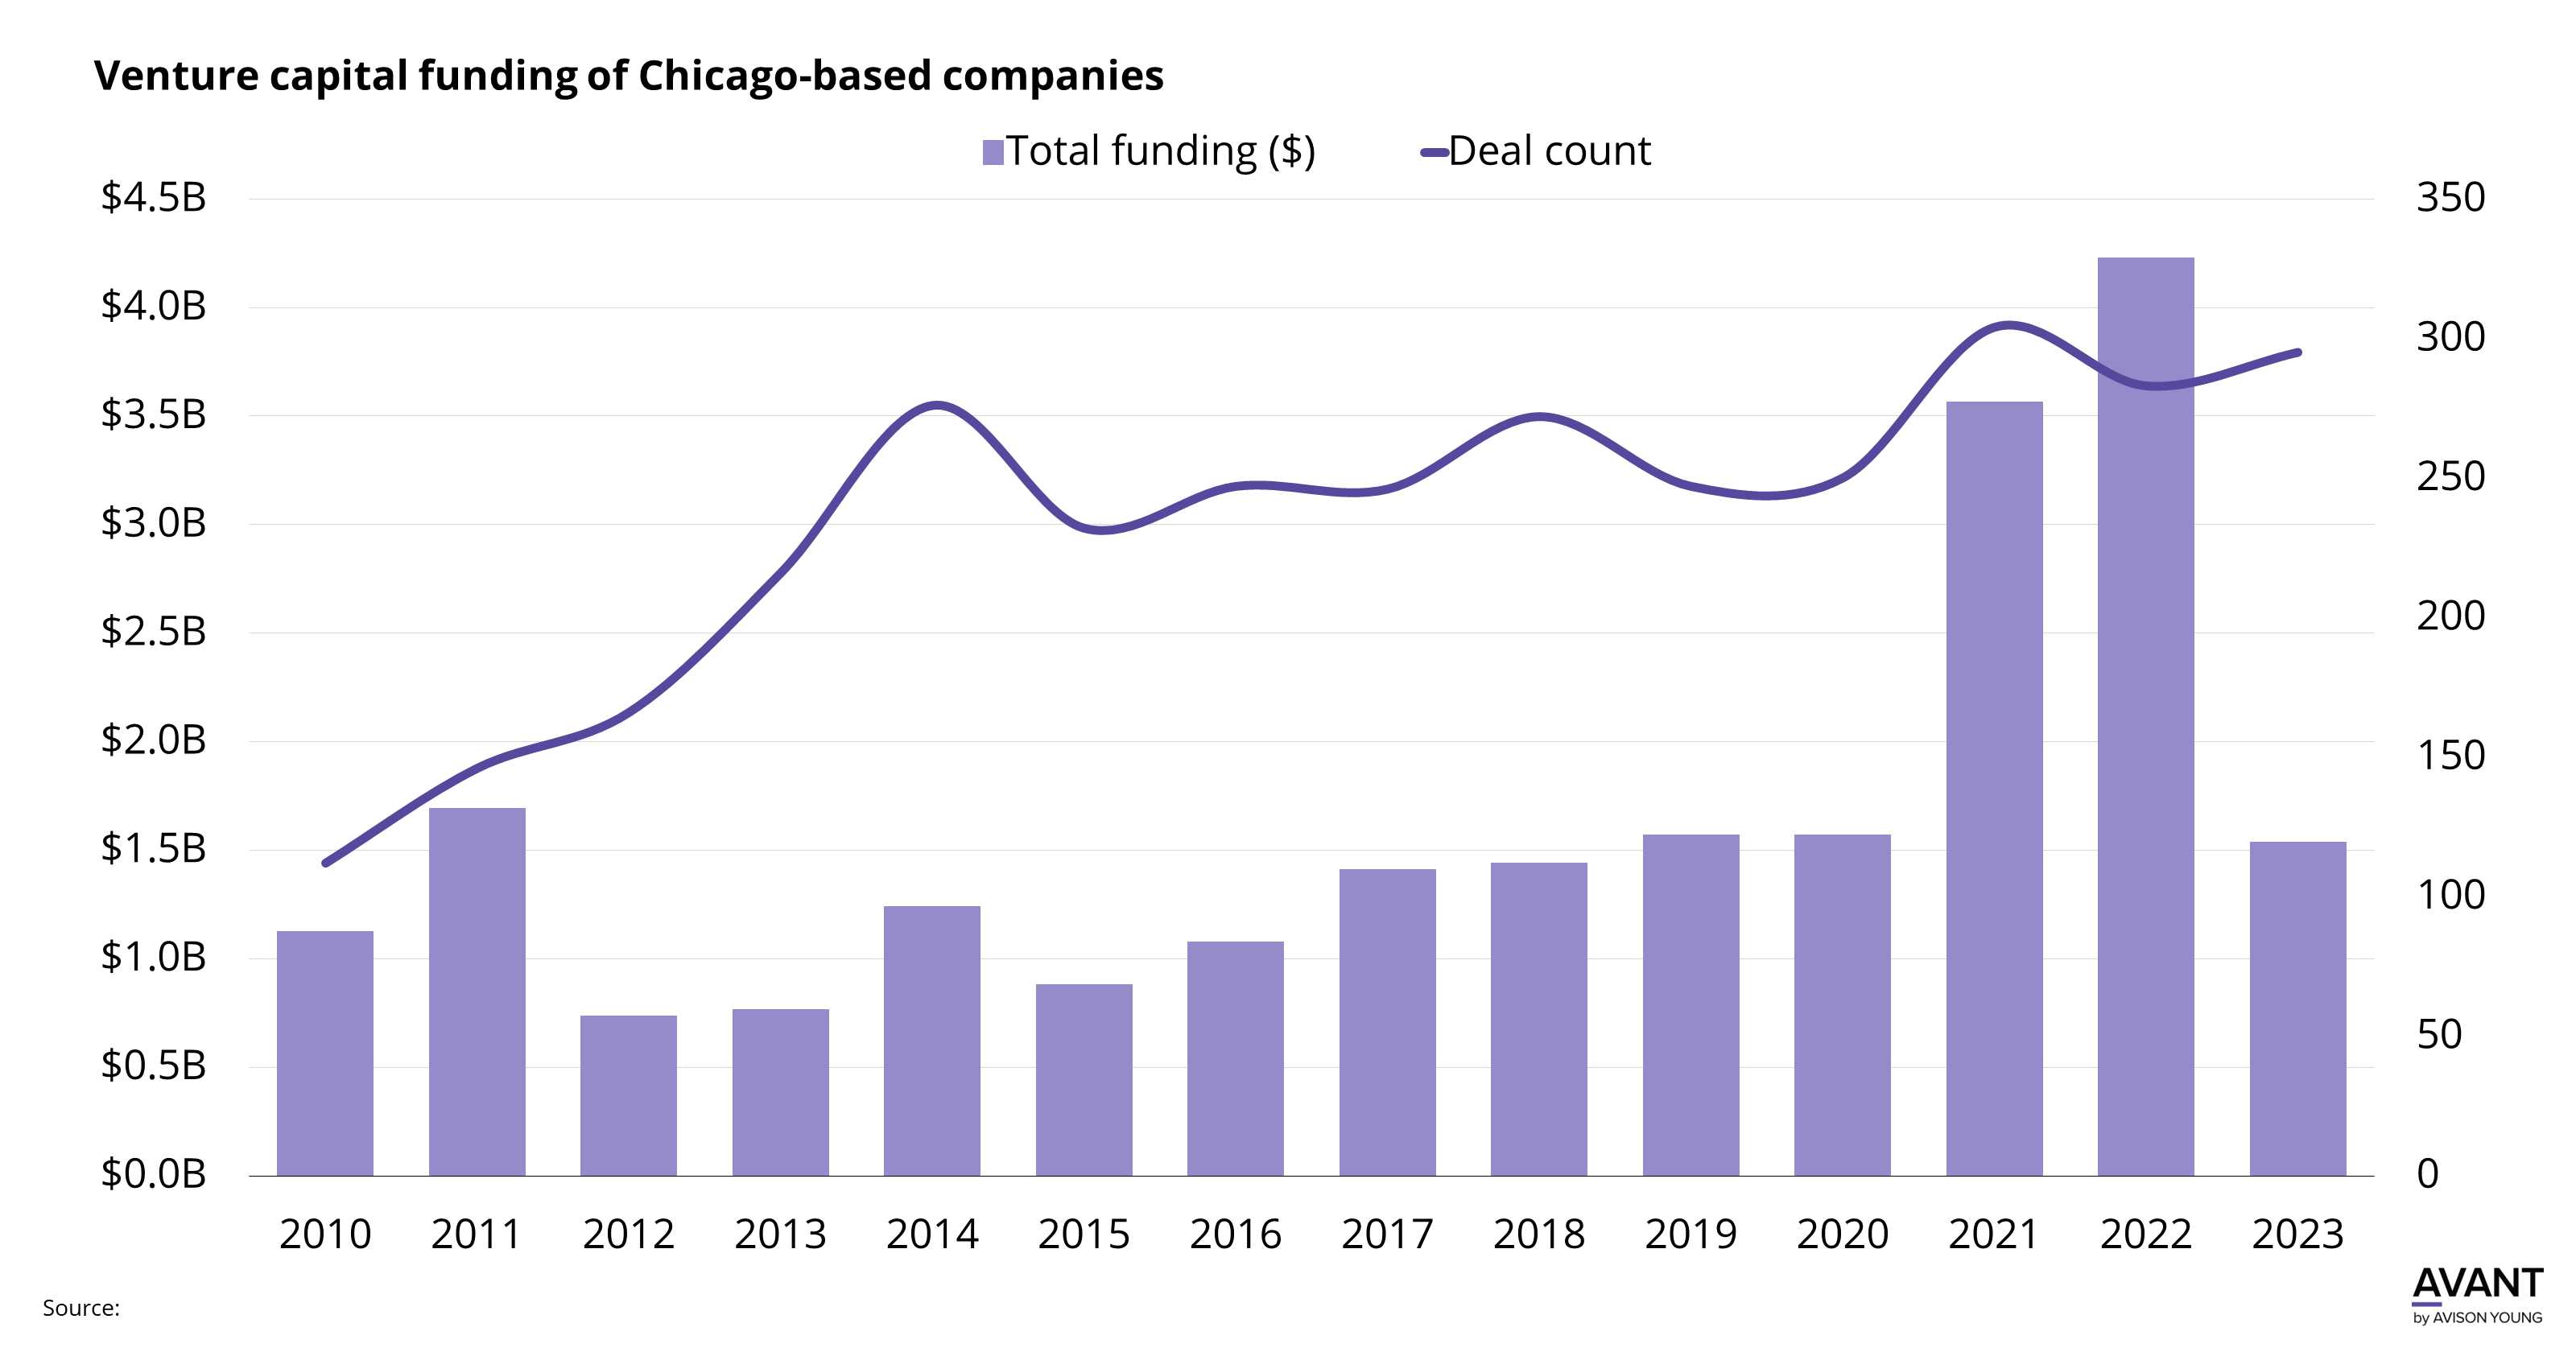 Chart shows the amount of total venture capital funding of Chicago-based companies as well as the deal count from 2010 to 2023